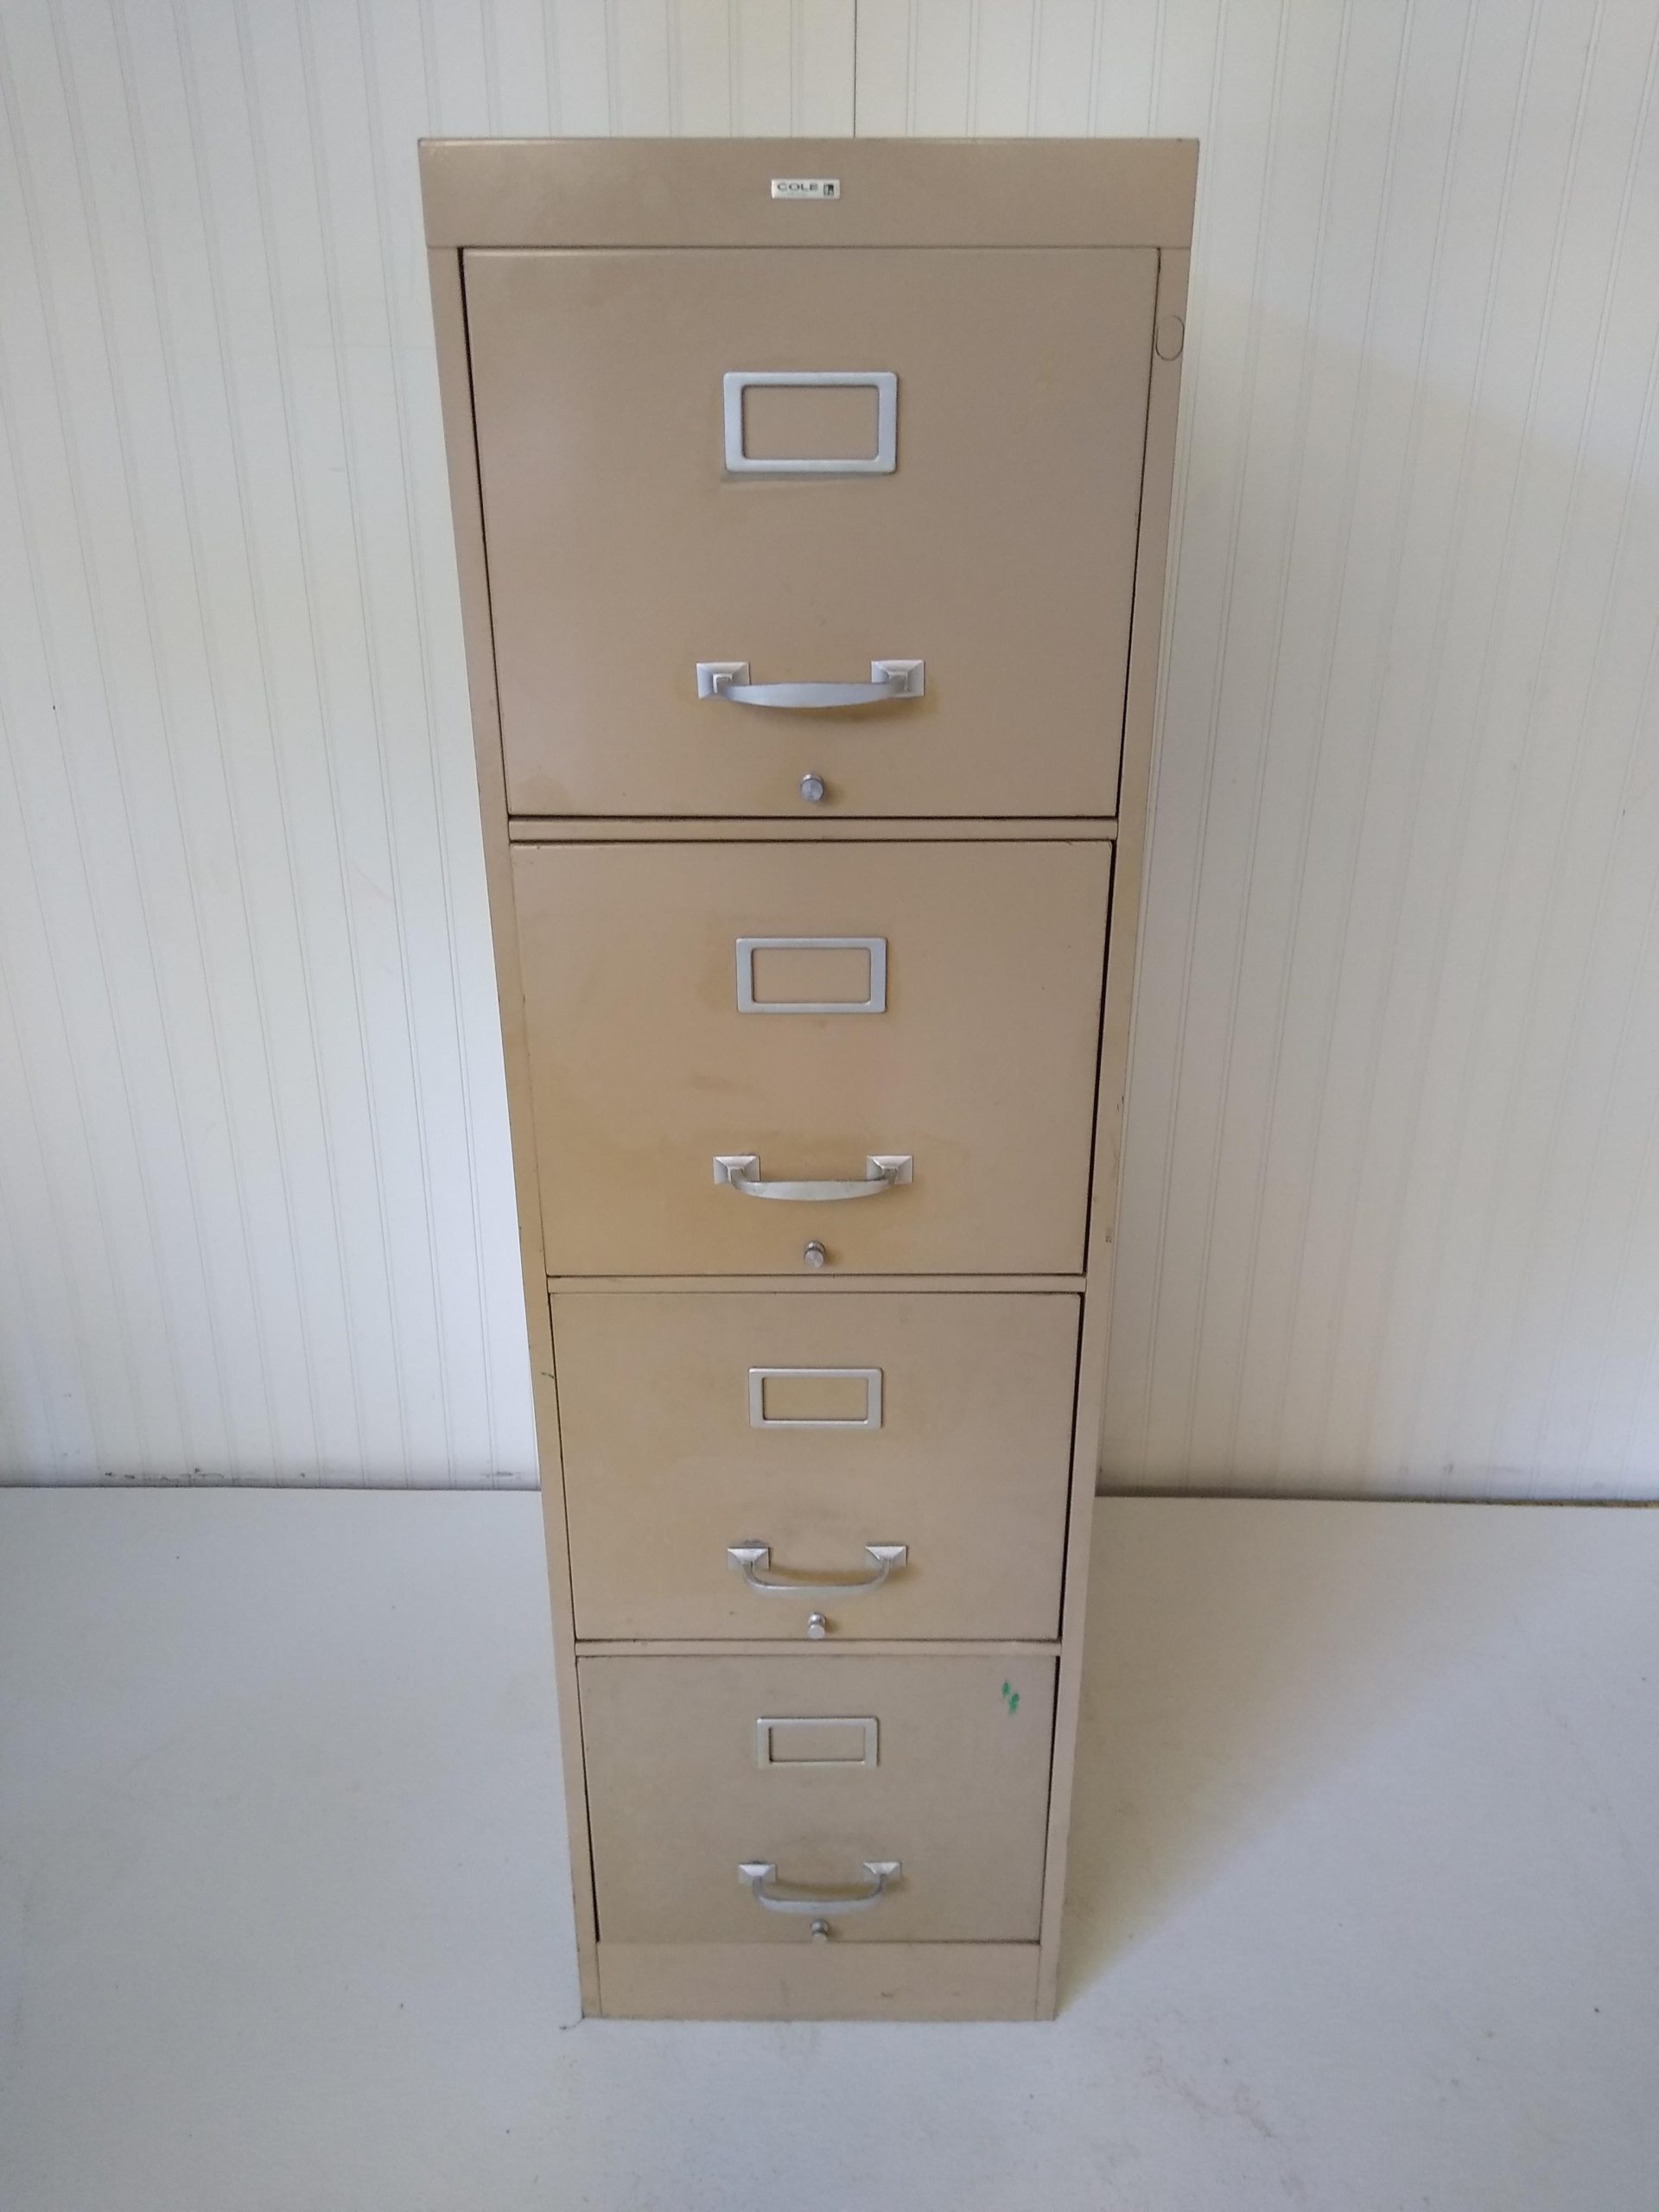 (Used) 4 Drawer Vertical File (MAOLB4DFCX20)-image